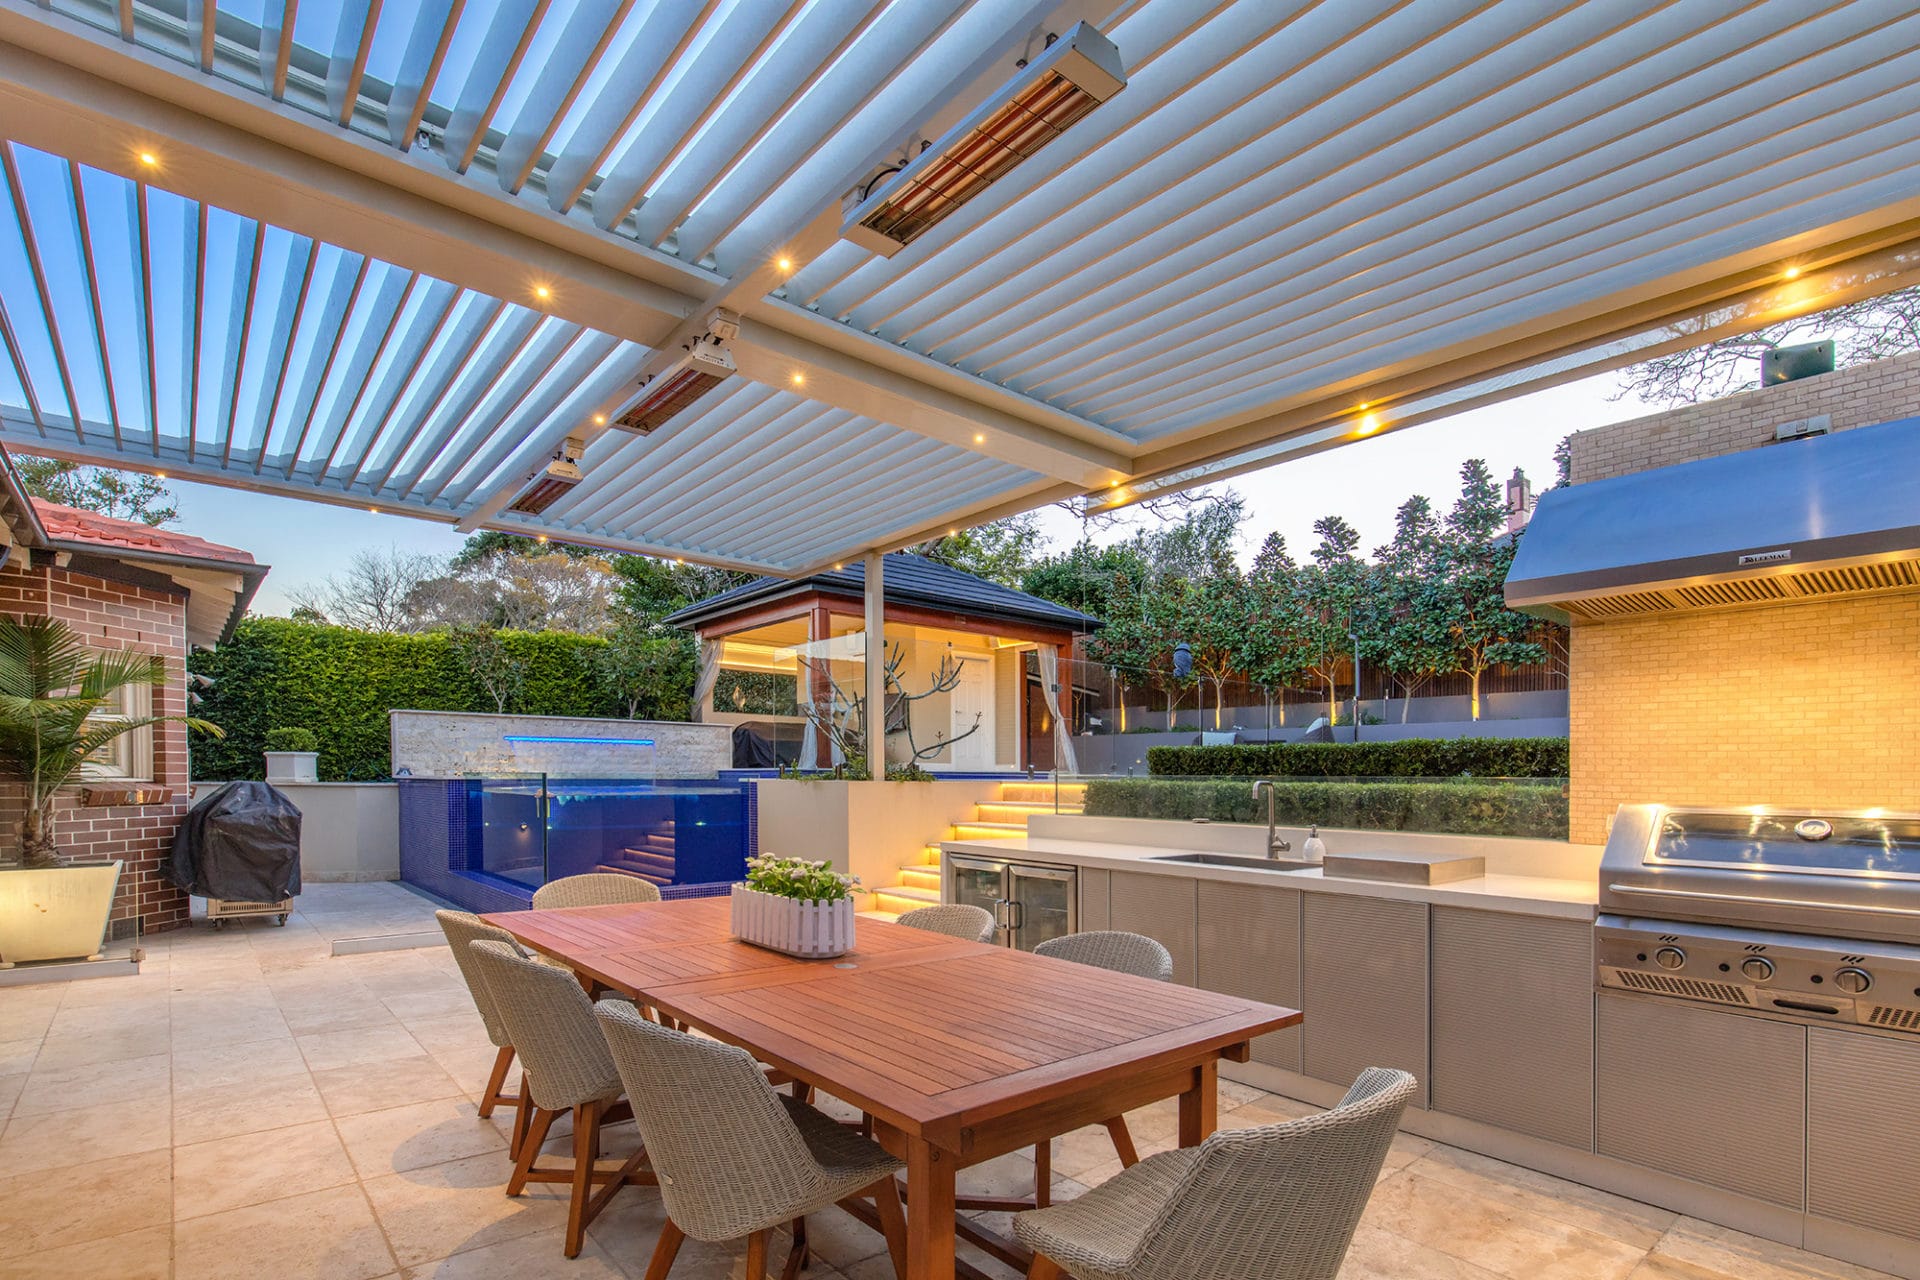 Haberfield pergola with louvre roof system, outdoor heating, down lights, outdoor BBQ and kitchen.